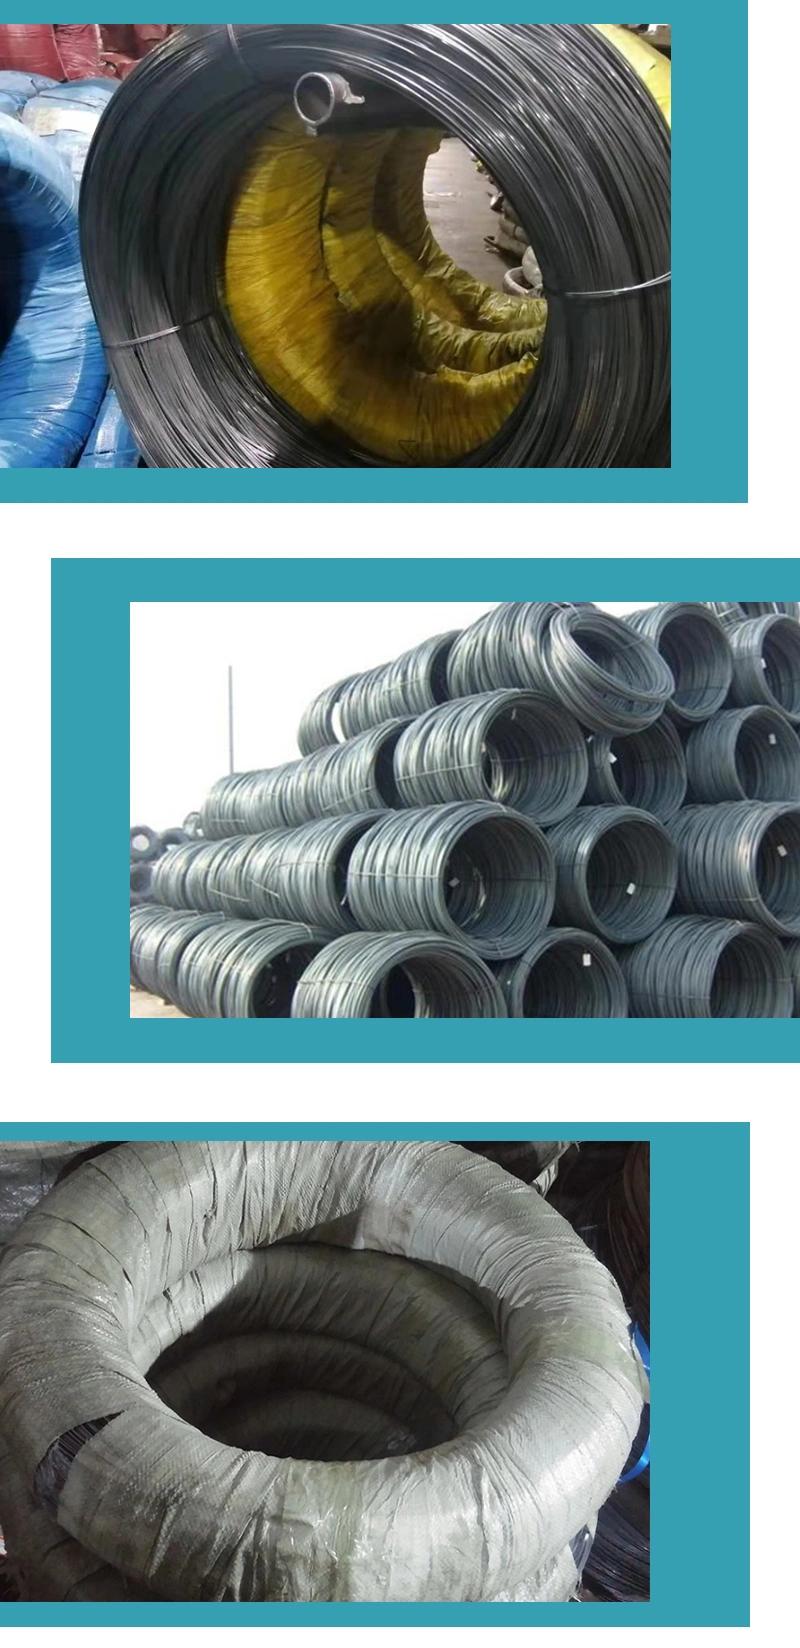 Chinese Suppliers Spring Steel Wire for Making Mattress